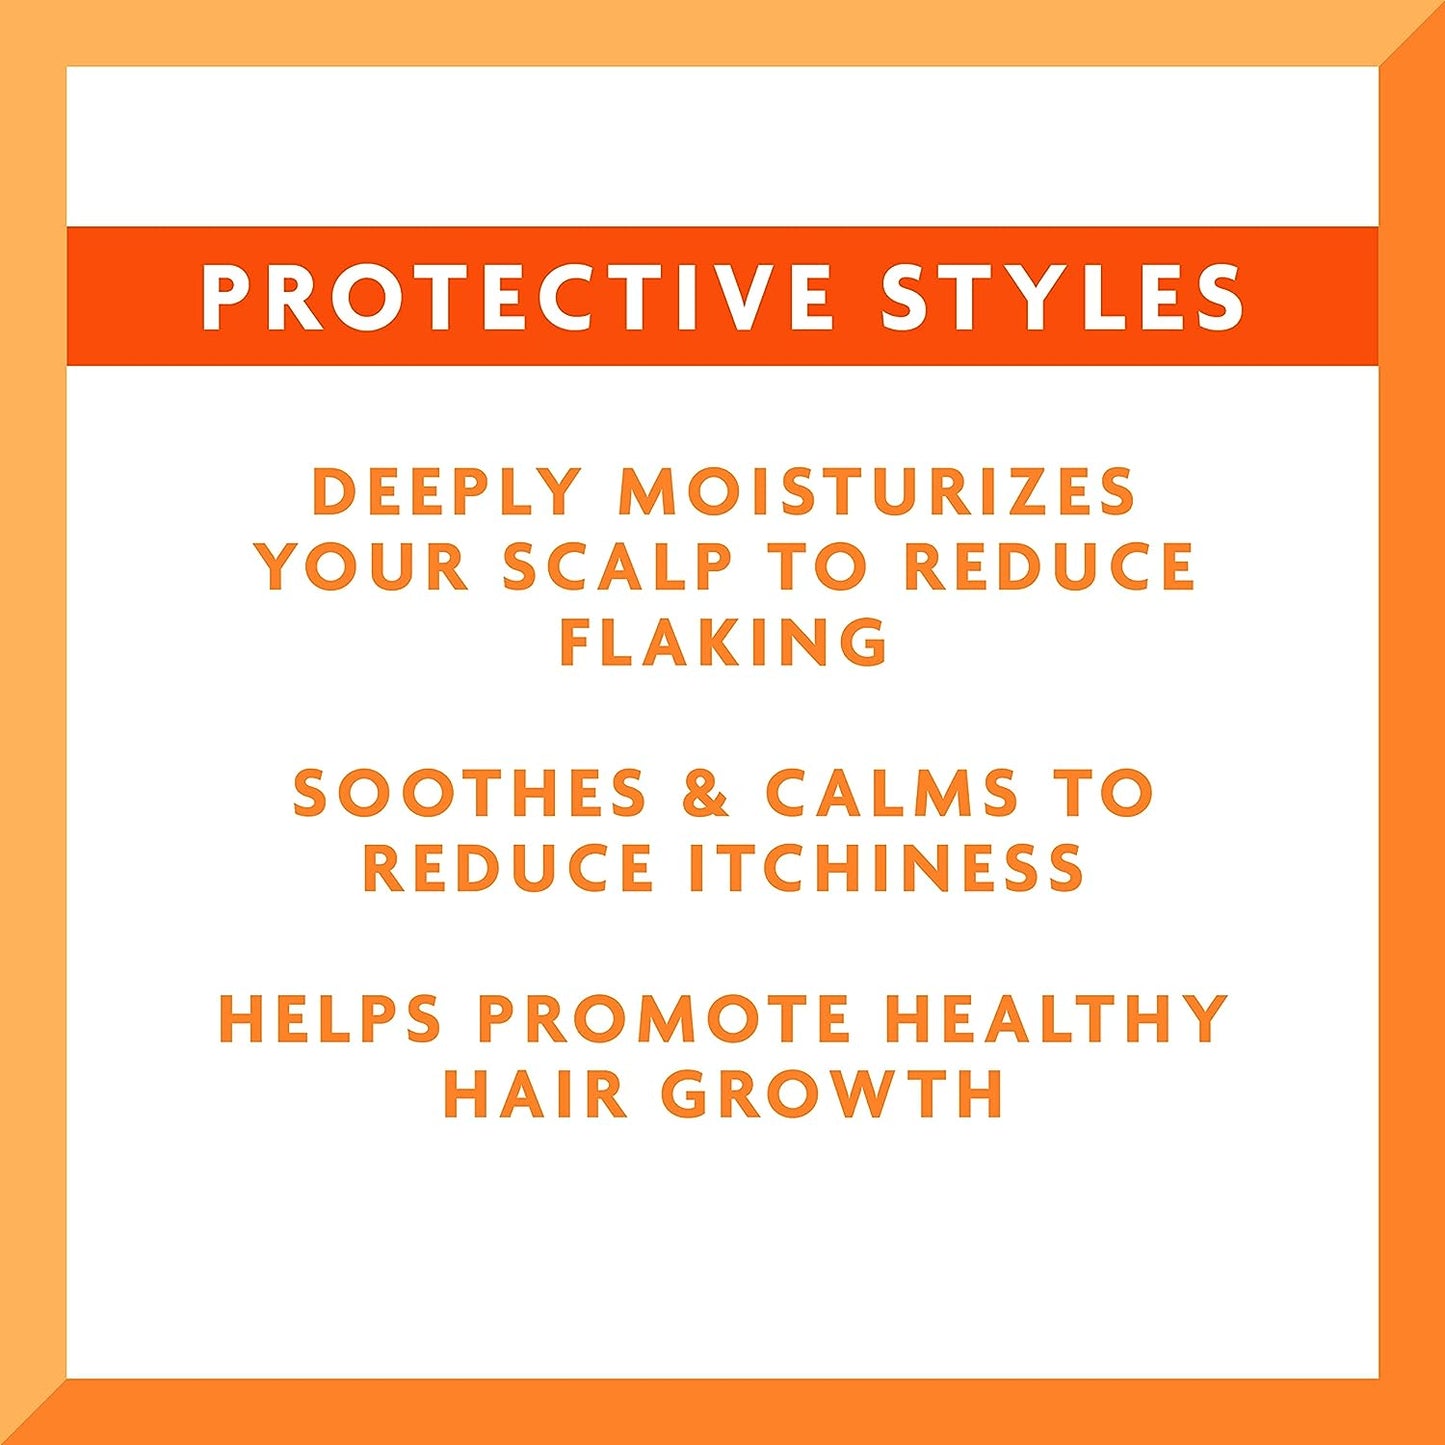 Cantu Protective Styles Daily Oil Drops 2oz